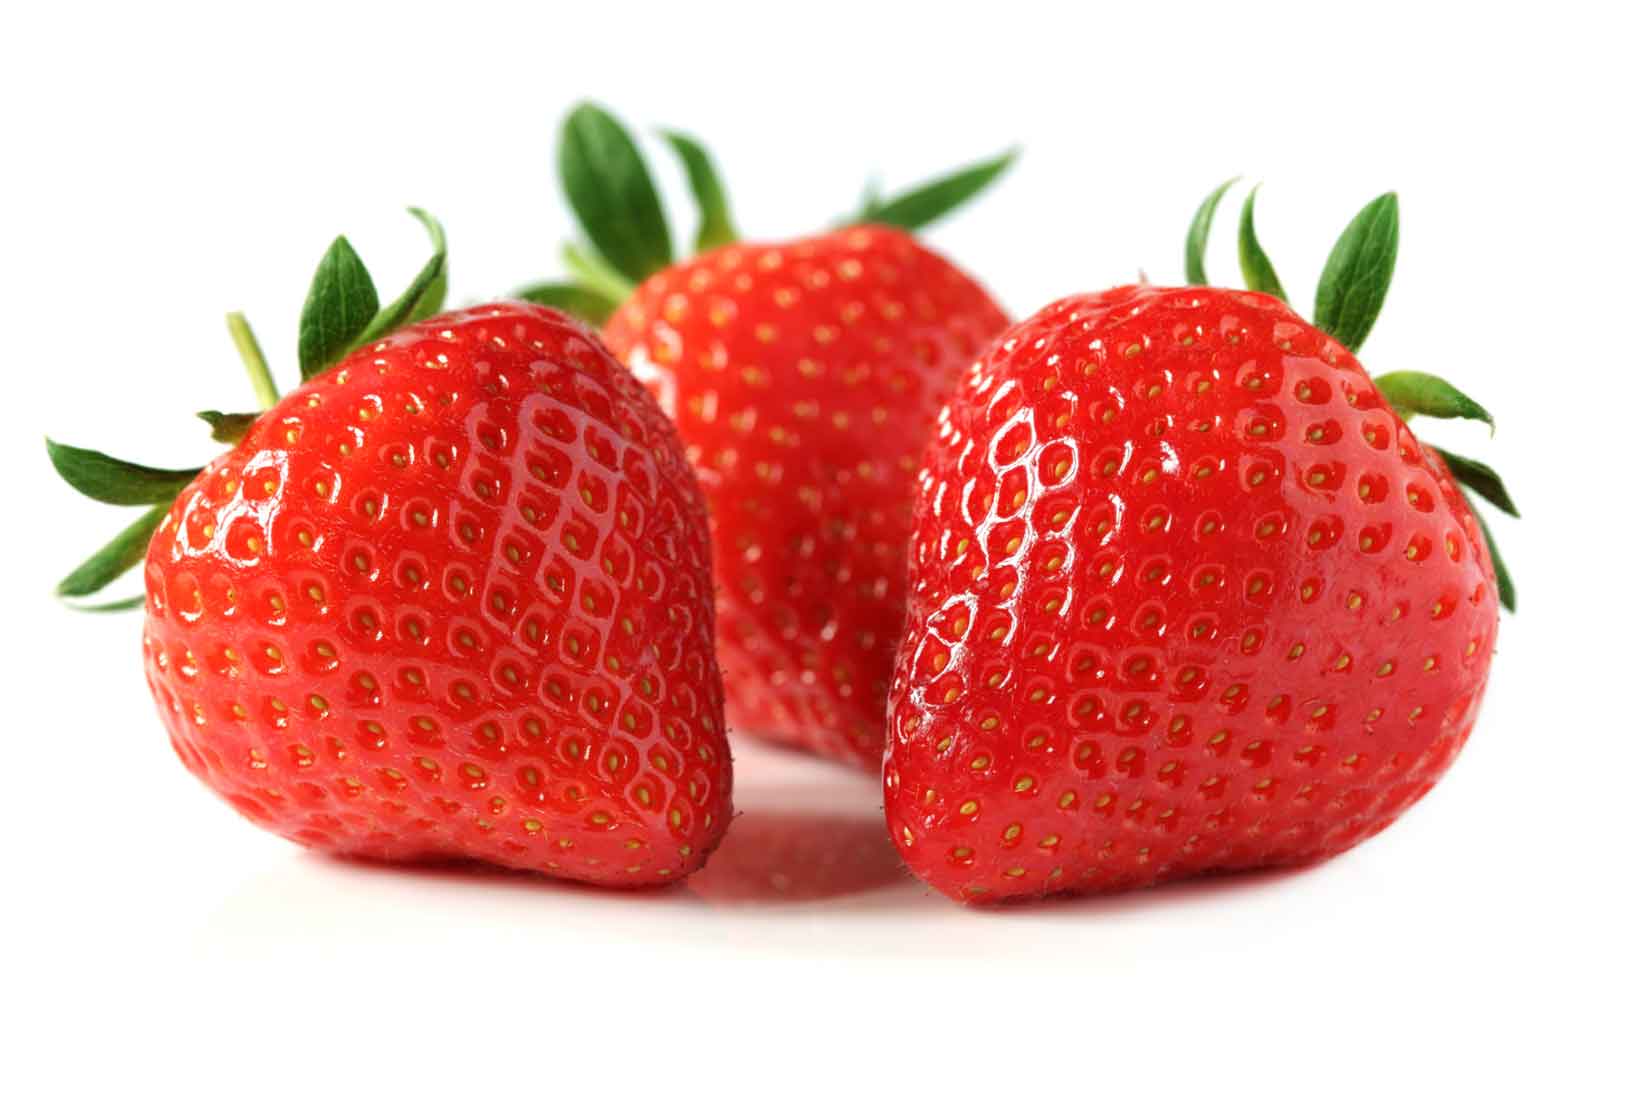 Strawberry image - Agro trade for import & export [Mahdy Fresh - since 2000]